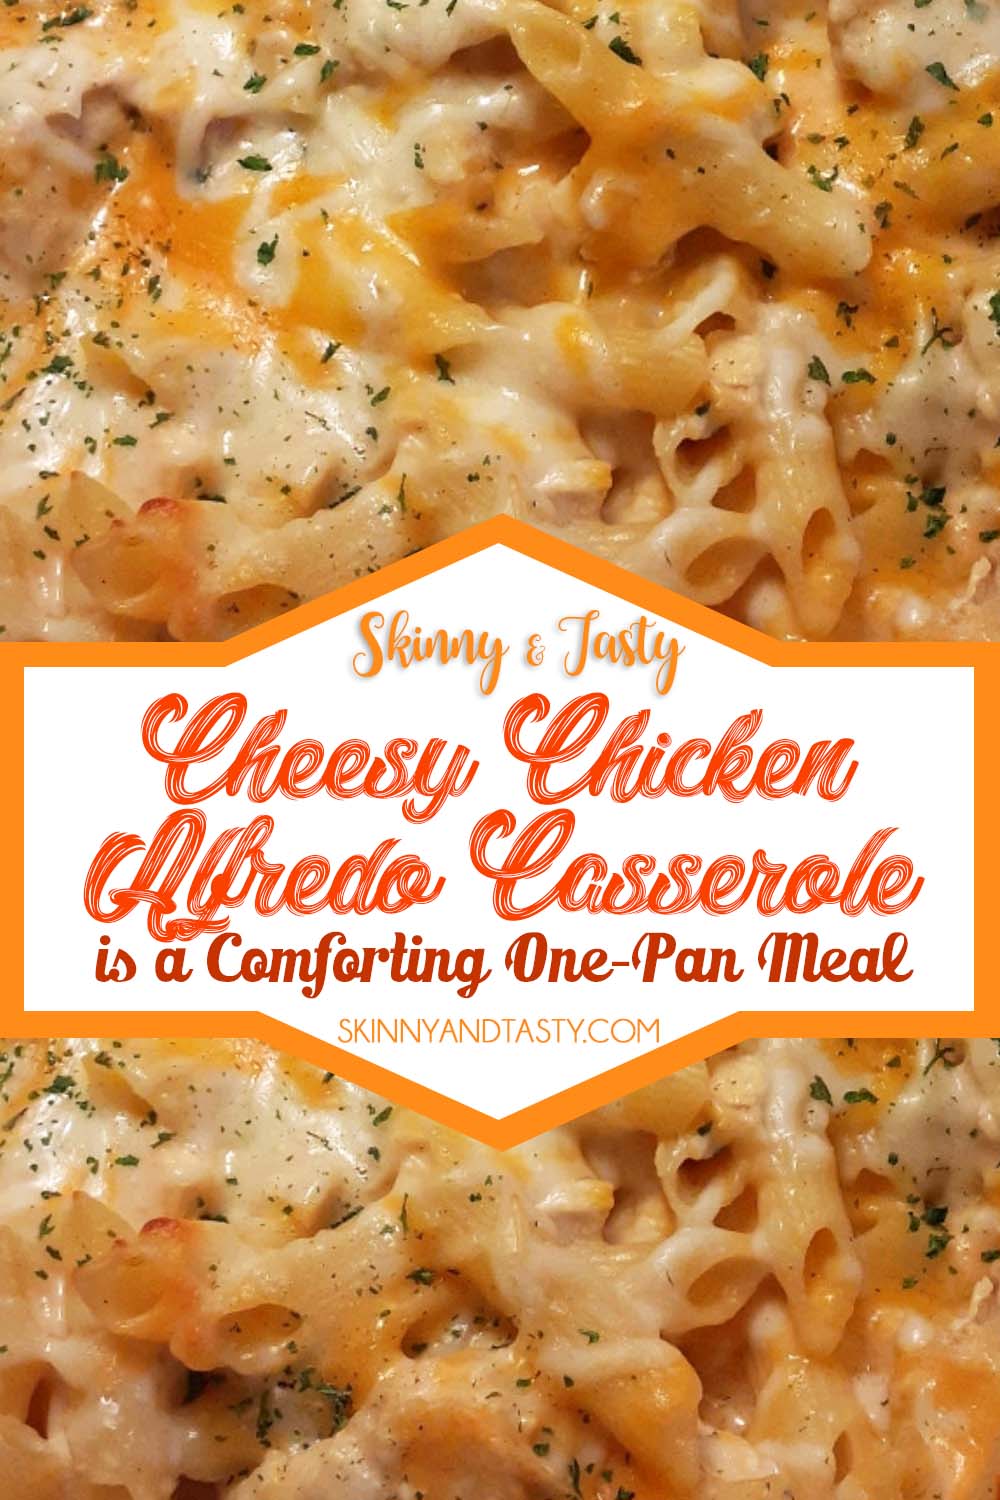 Cheesy Chicken Alfredo Casserole Is a Comforting One-Pan Meal